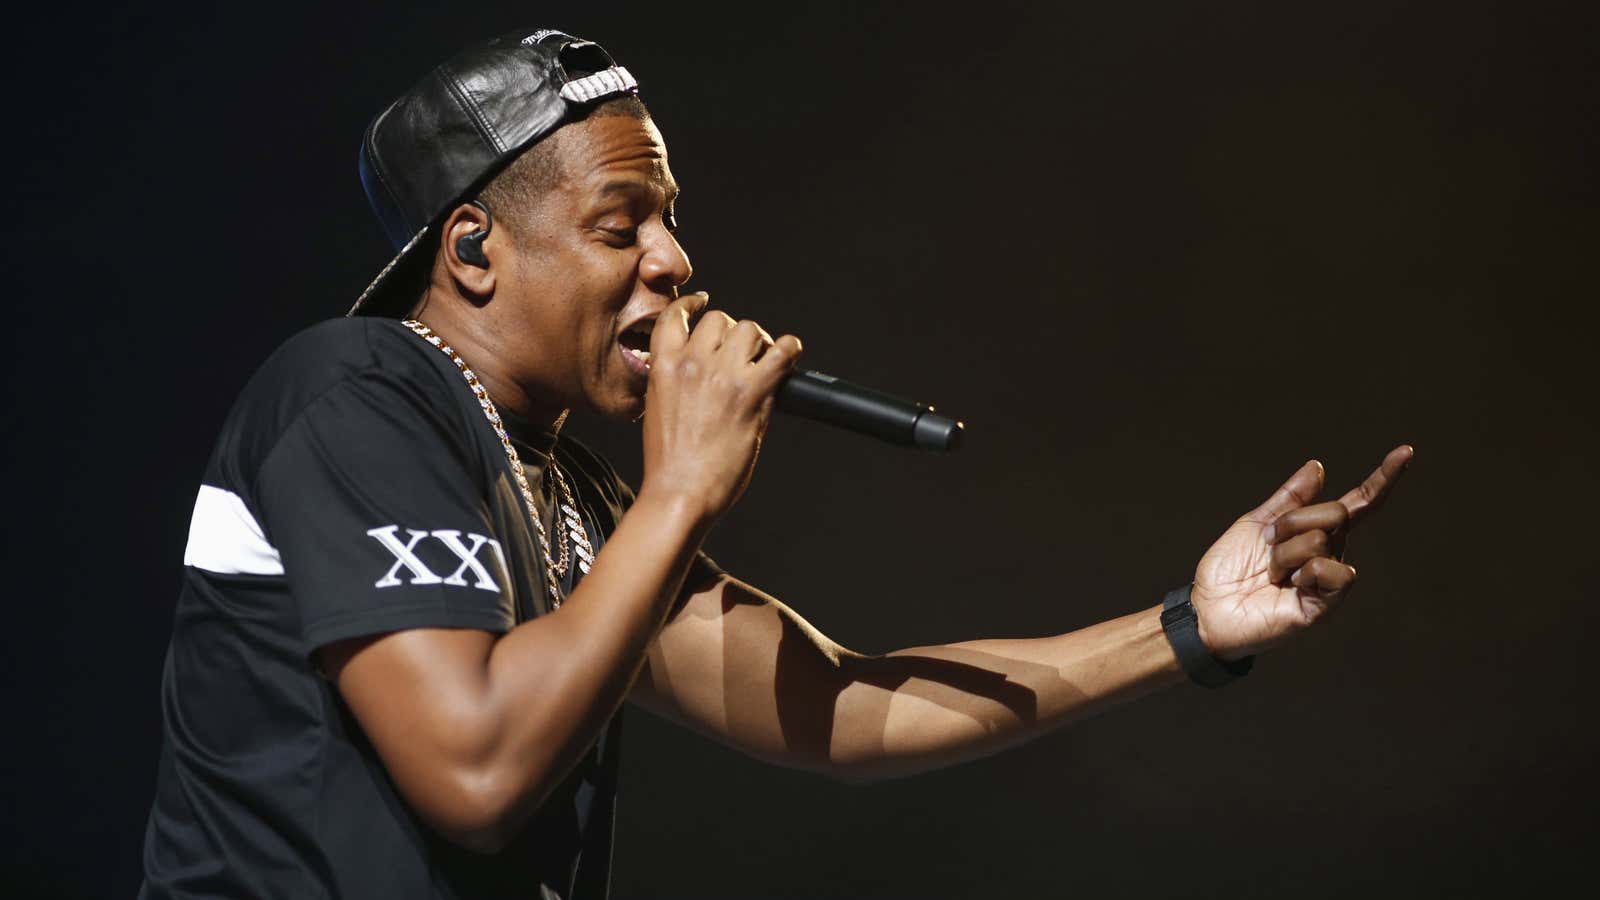 Jay Z and Goldman Sachs have more in common than you think.